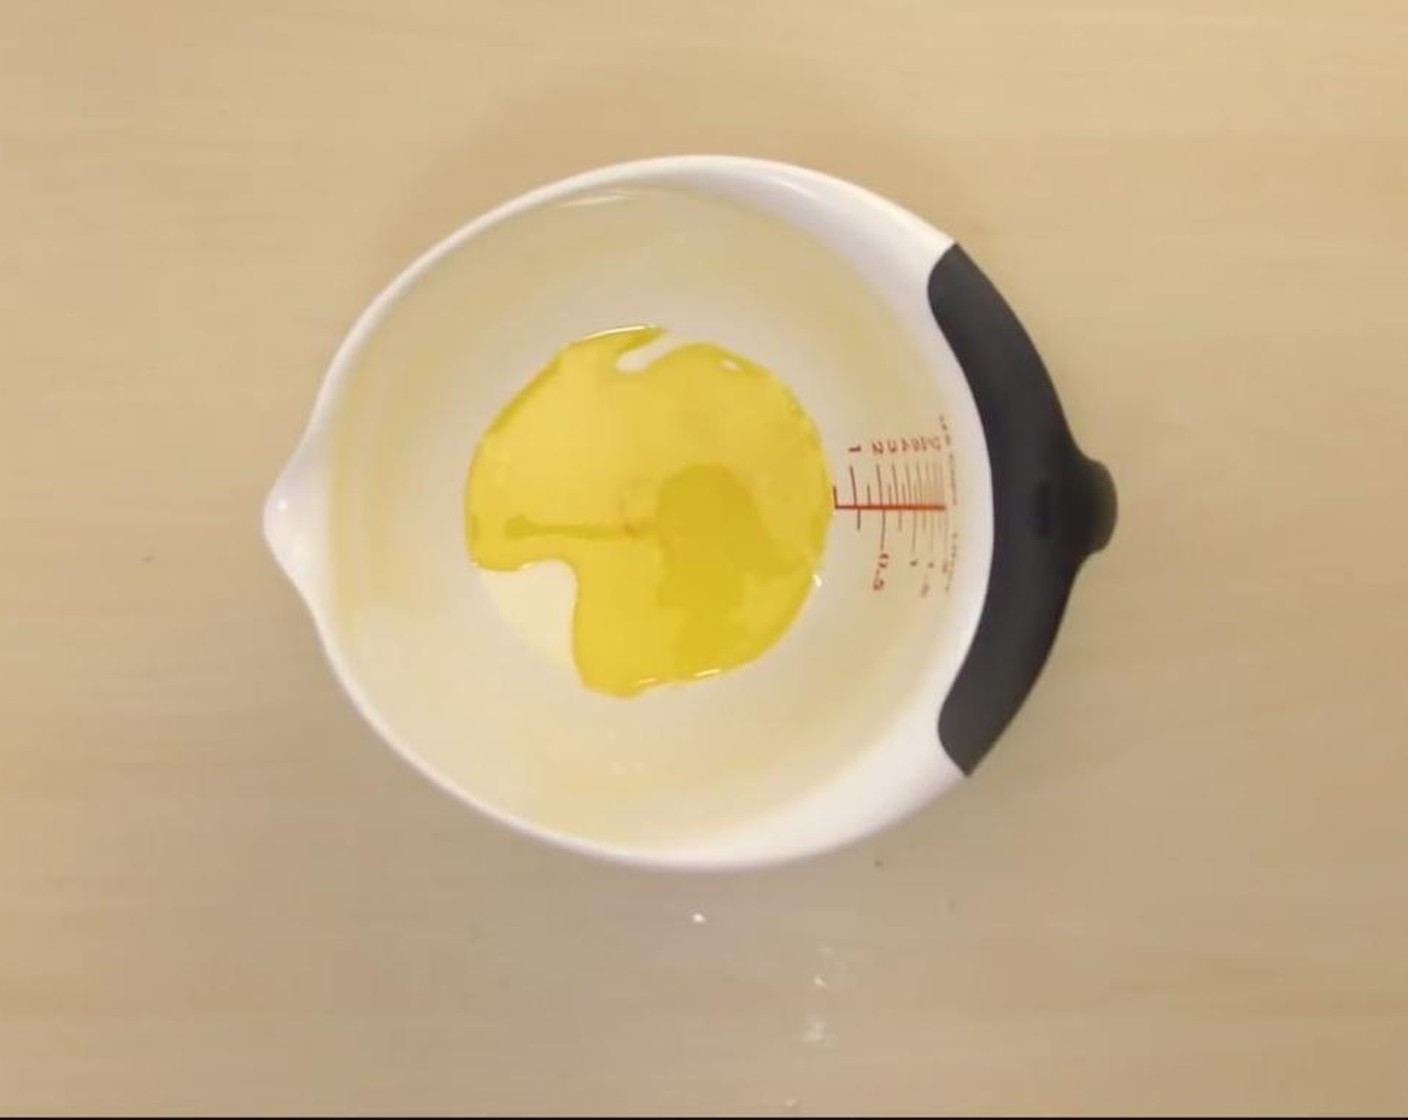 step 4 In a large measuring cup or bowl, combine Butter (3 Tbsp) and Milk (1/4 cup). Mix with a whisk. Then sieve in All-Purpose Flour (3/4 cup). Continue to mix well.